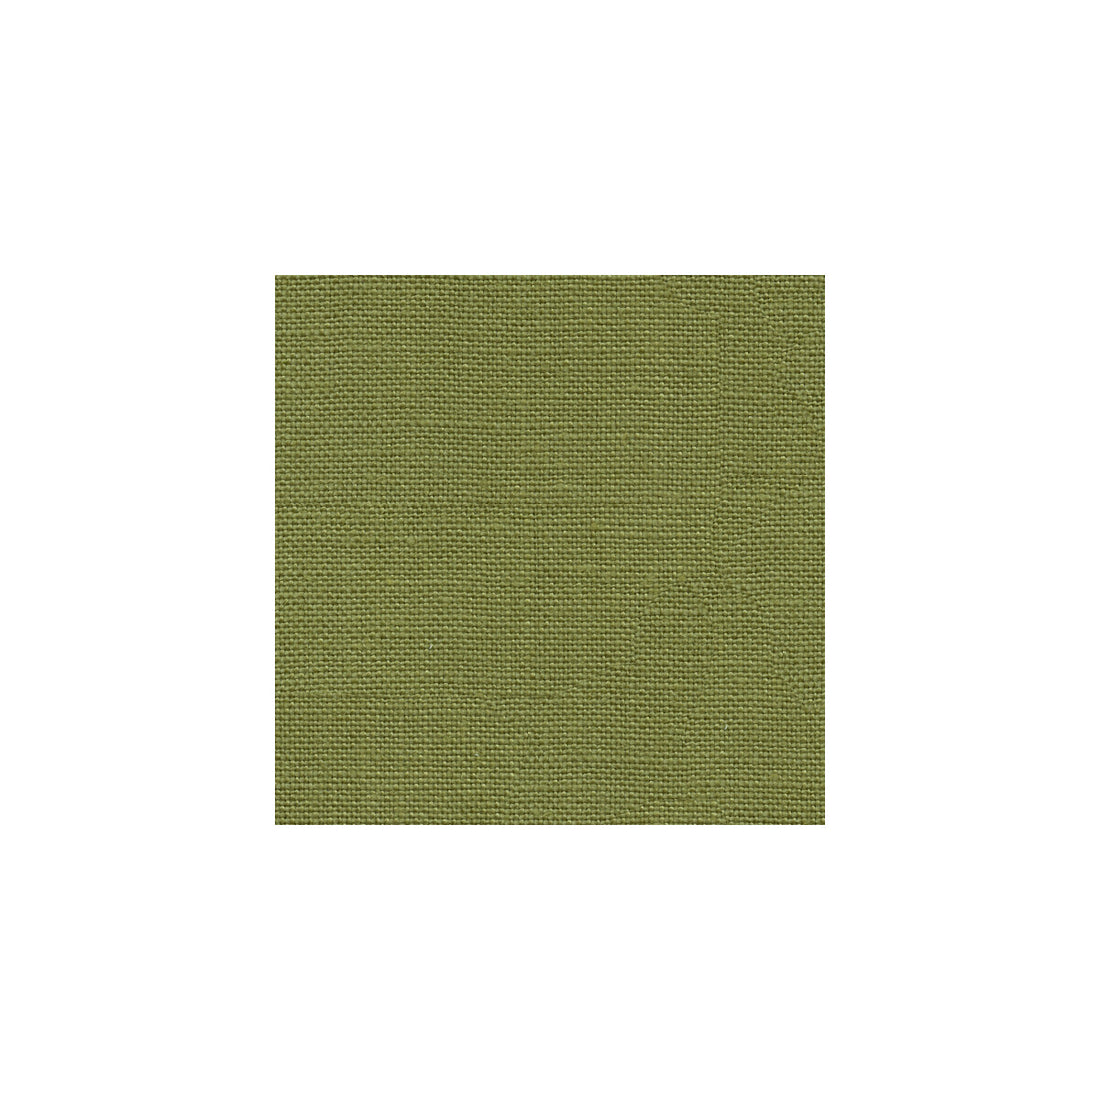 Madison Linen fabric in meadow color - pattern 32330.3.0 - by Kravet Design in the Gis collection